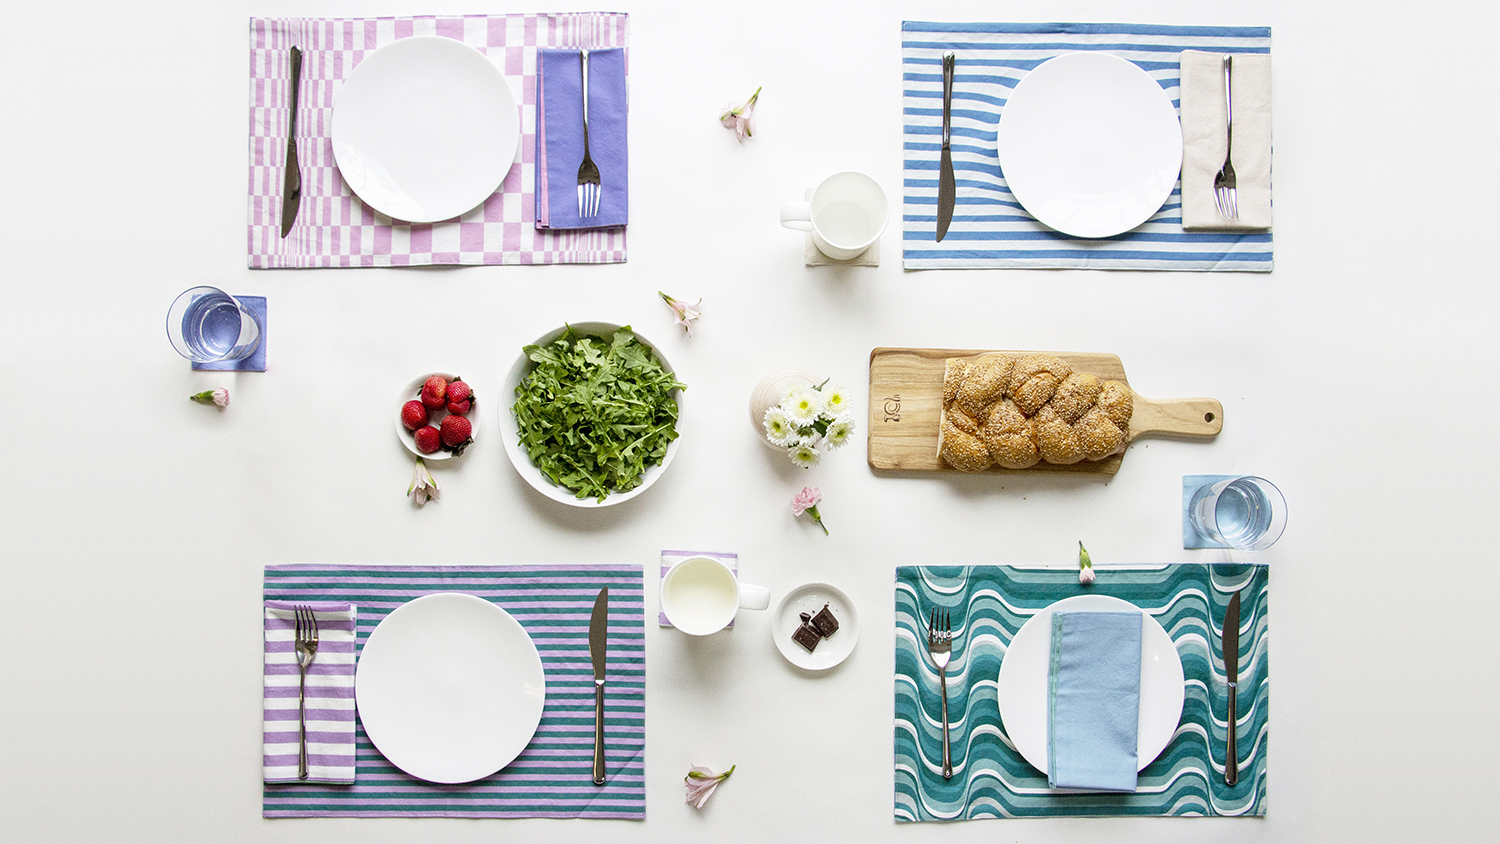 Placemats and food on a table.